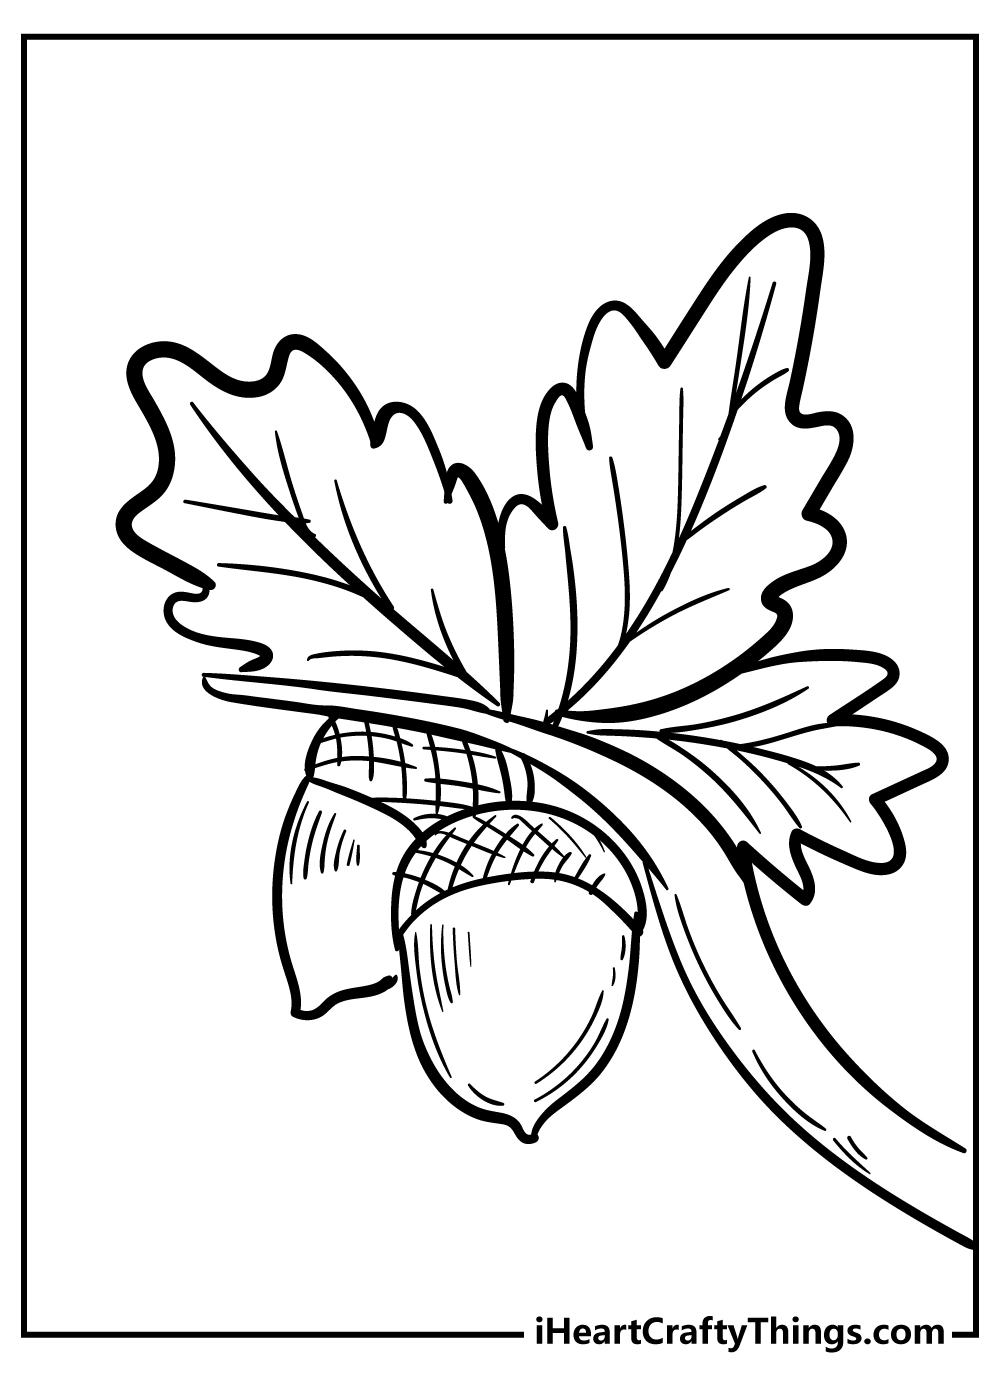 Acorn Coloring Sheet for children free download